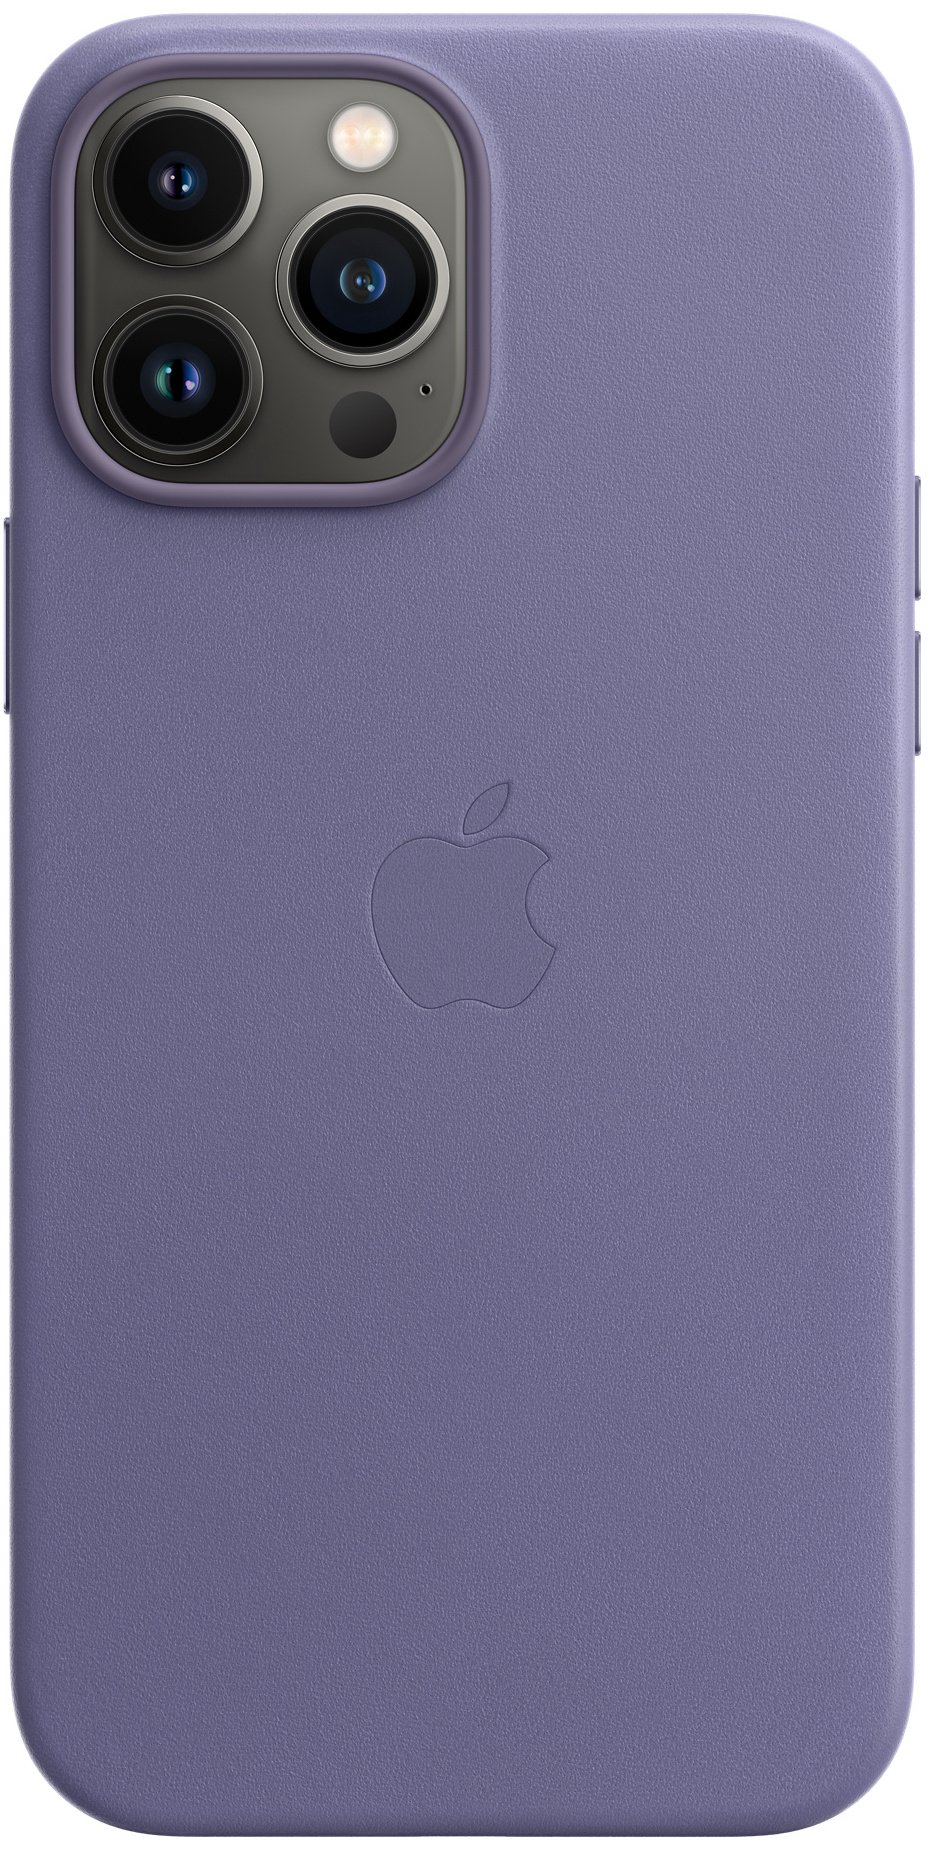 Even the iPhone 13 Pro Max can be cute with the right case